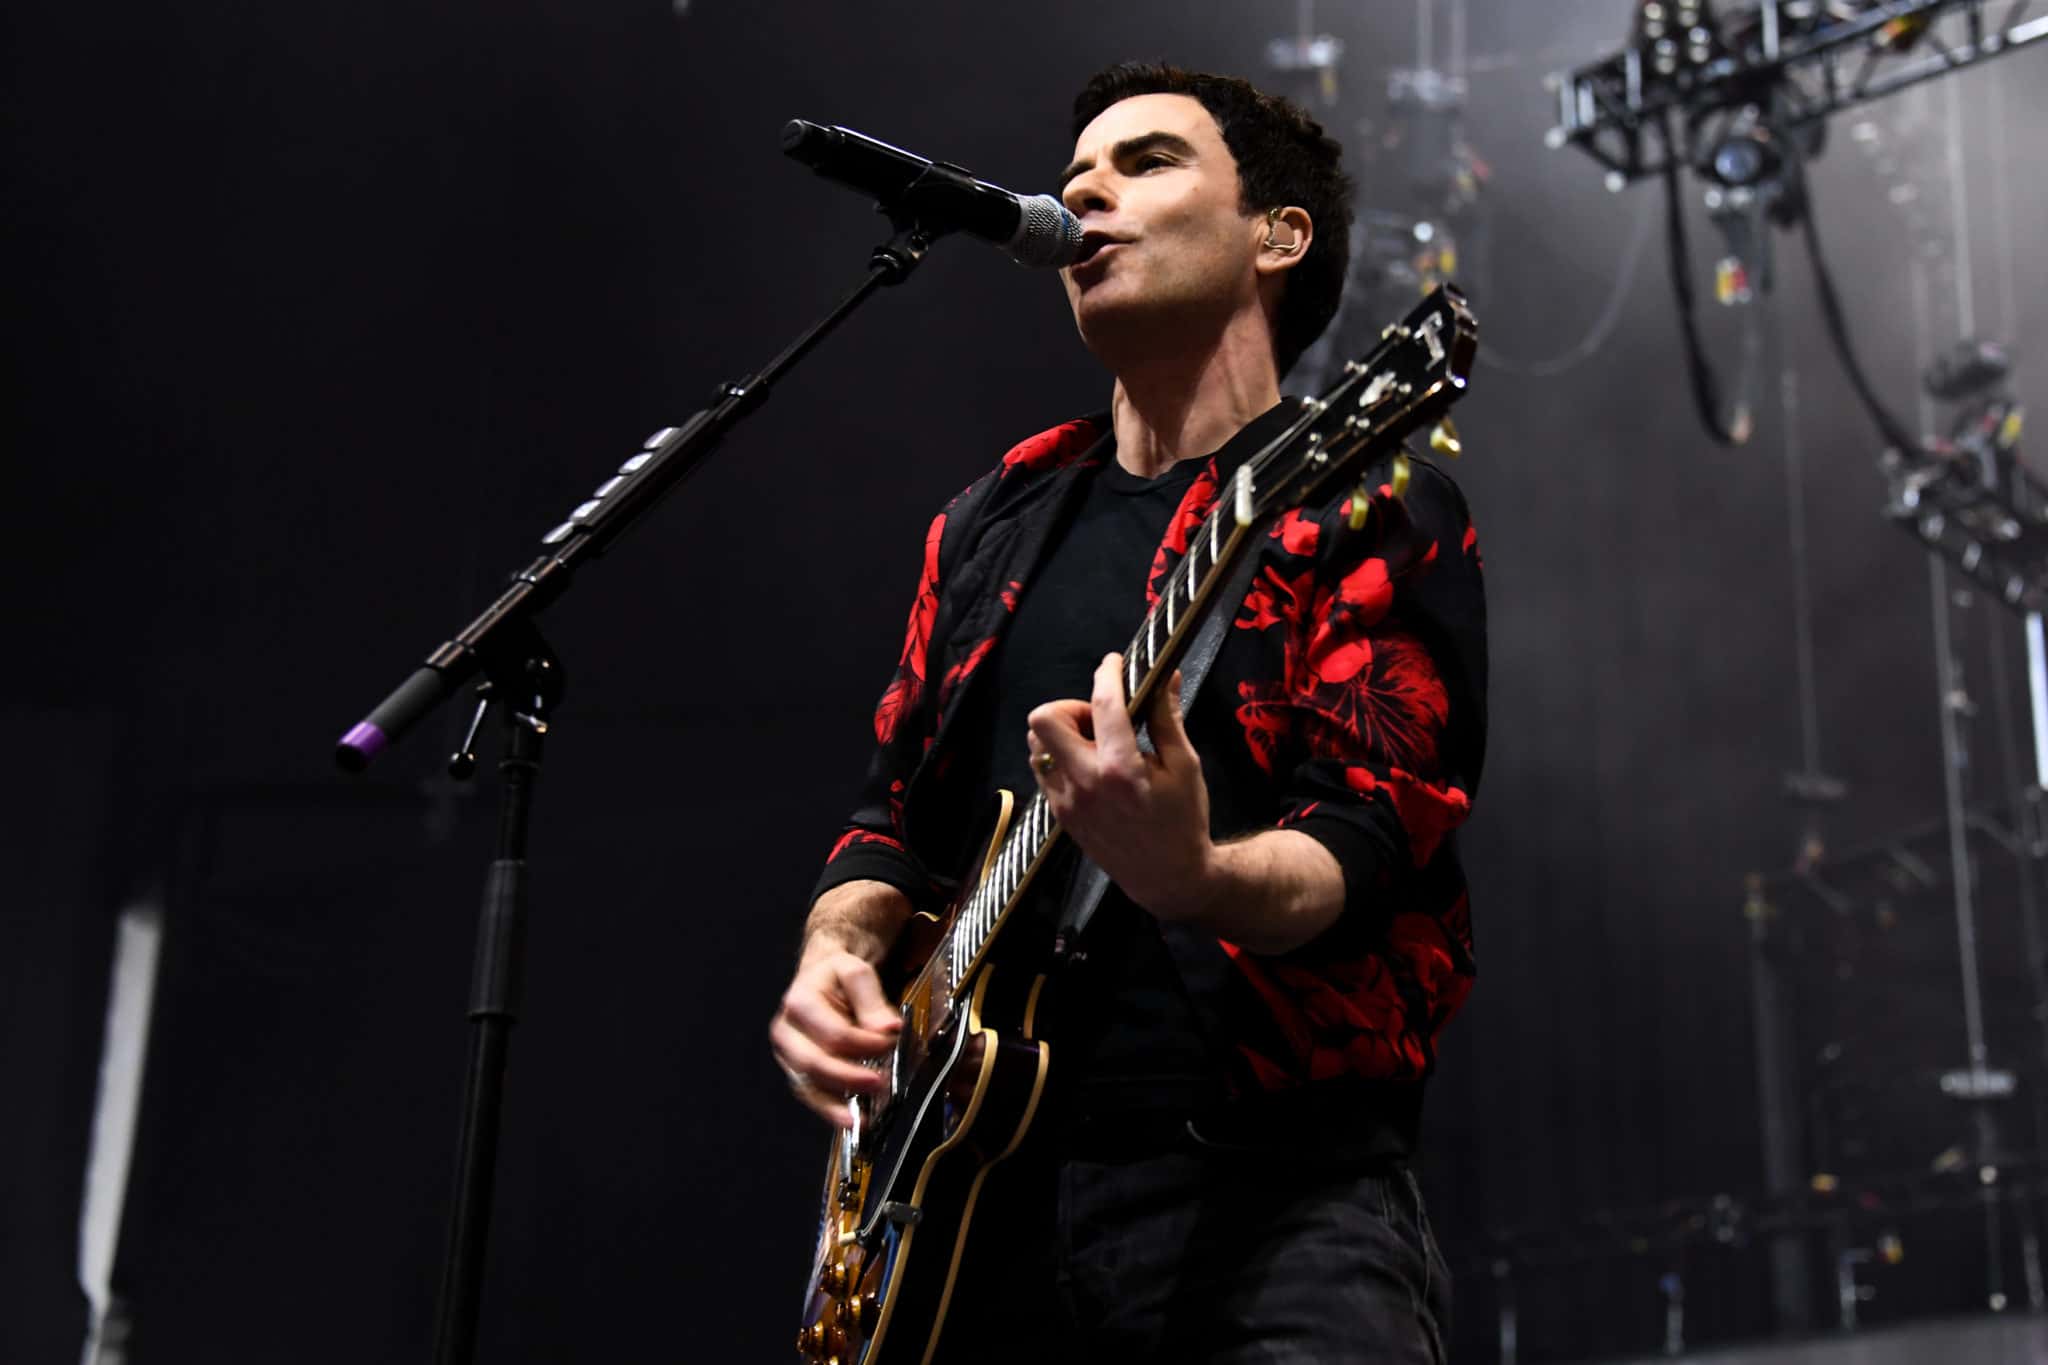 Kelly Jones of Welsh rock band Stereophonics performs on stage at the O2 Arena in London on March 6, 2020. 